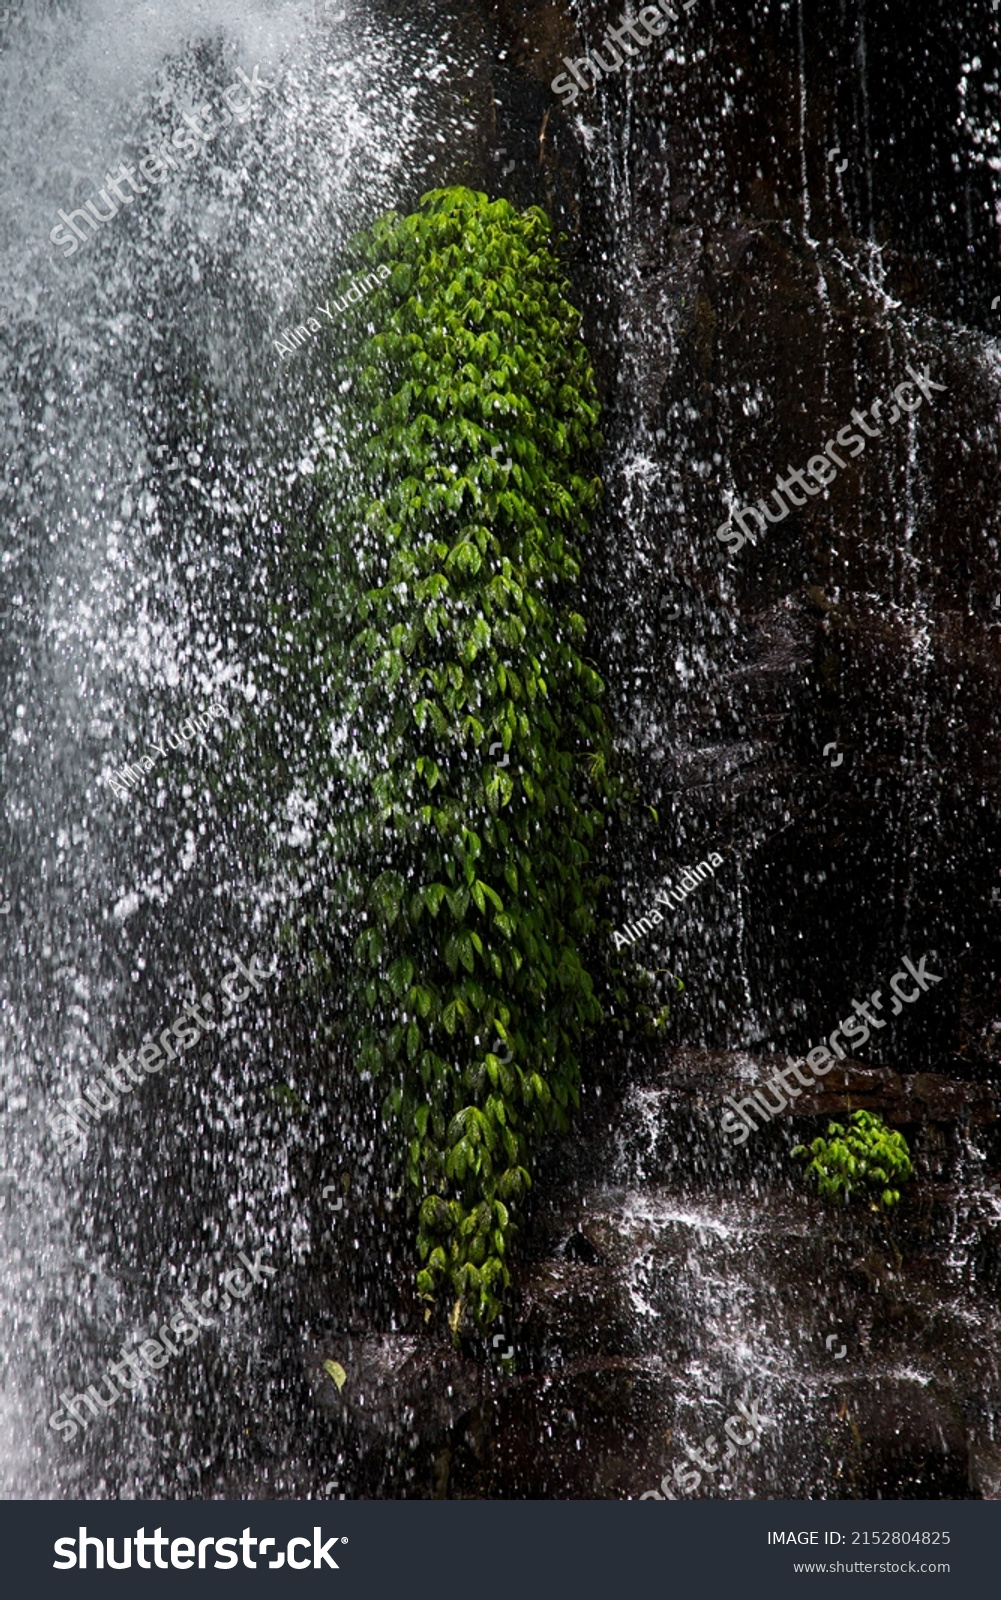 Shining falling water and splashes on lush green foliage of tropical plant on brown wet rock - jungle waterfall closeup, texture, vertical.  Scenic landscape from travel. #2152804825